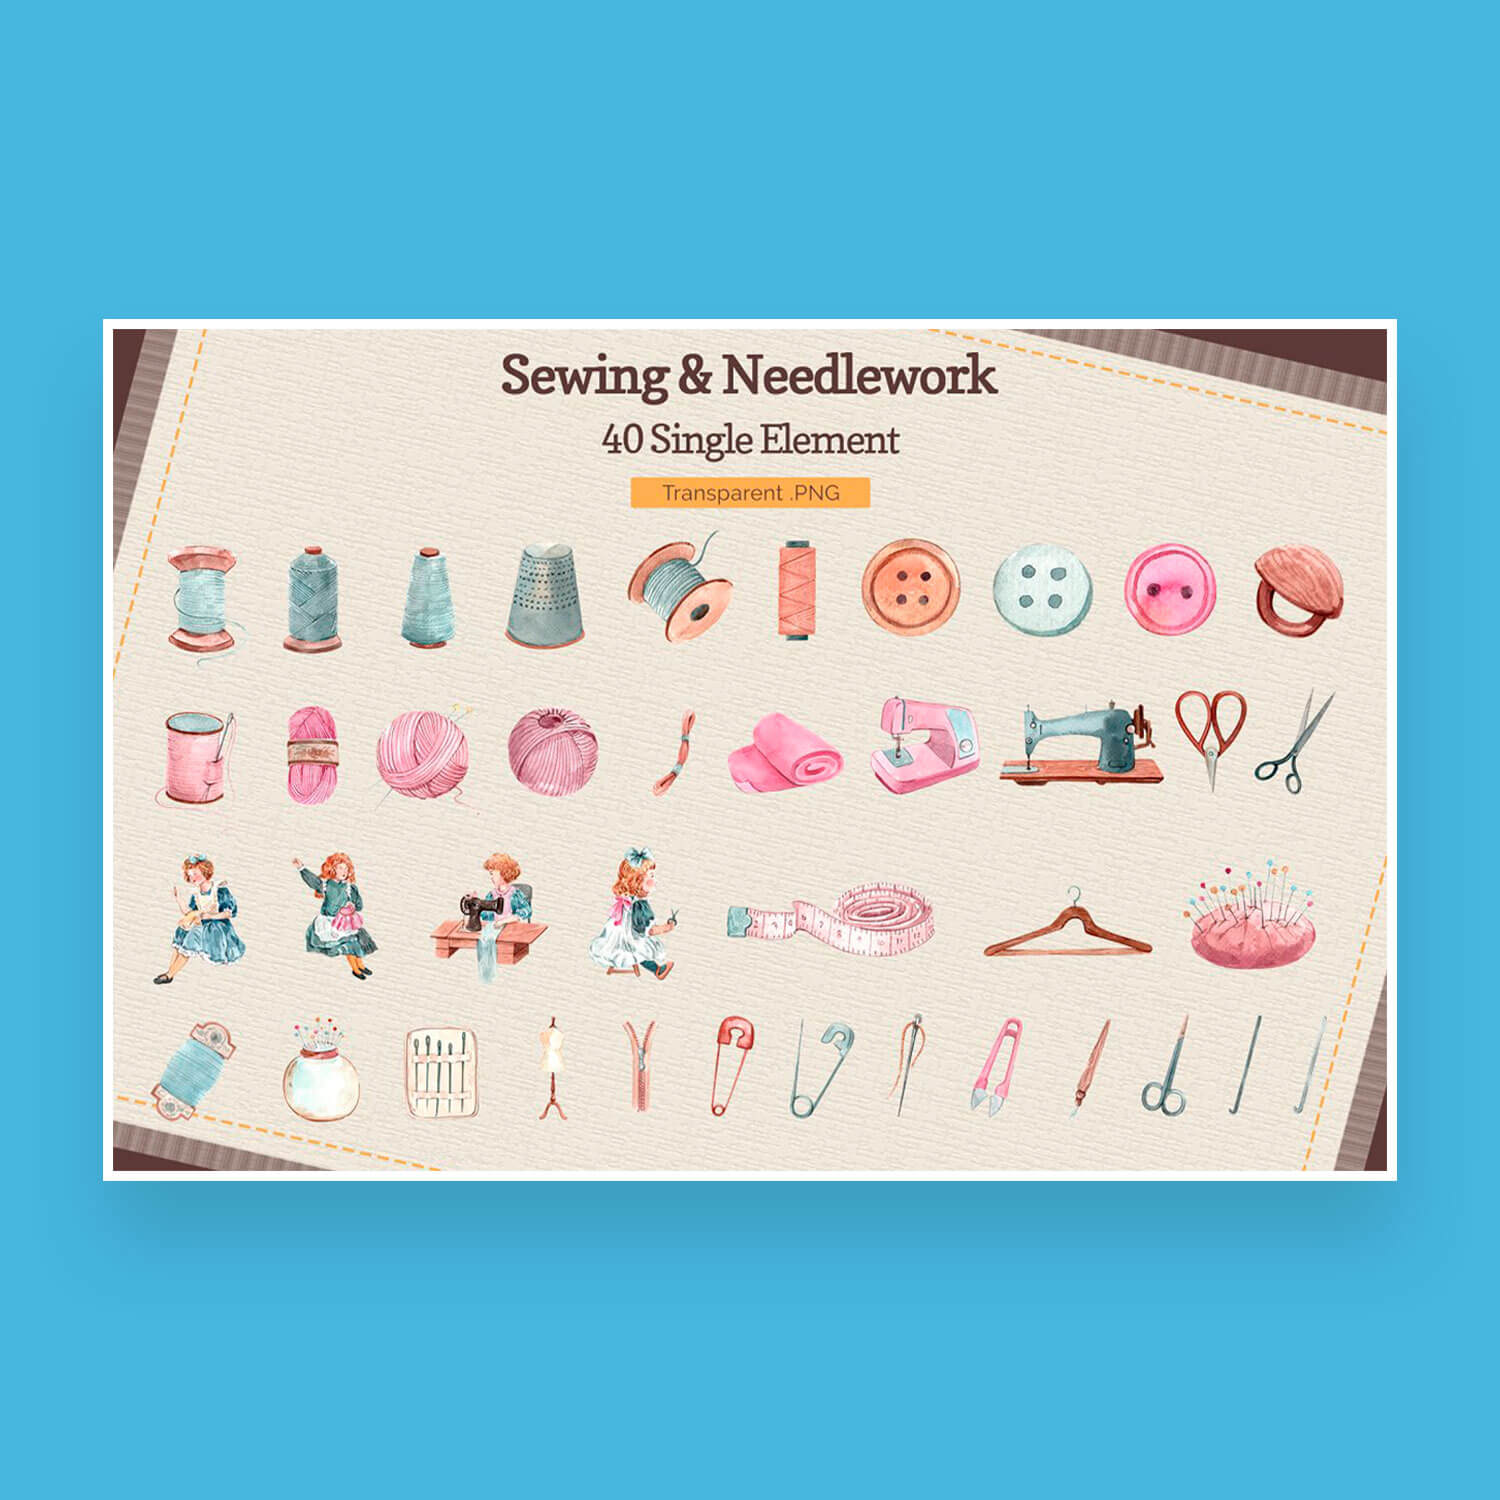 Sewing and Needlework in 40 single element.